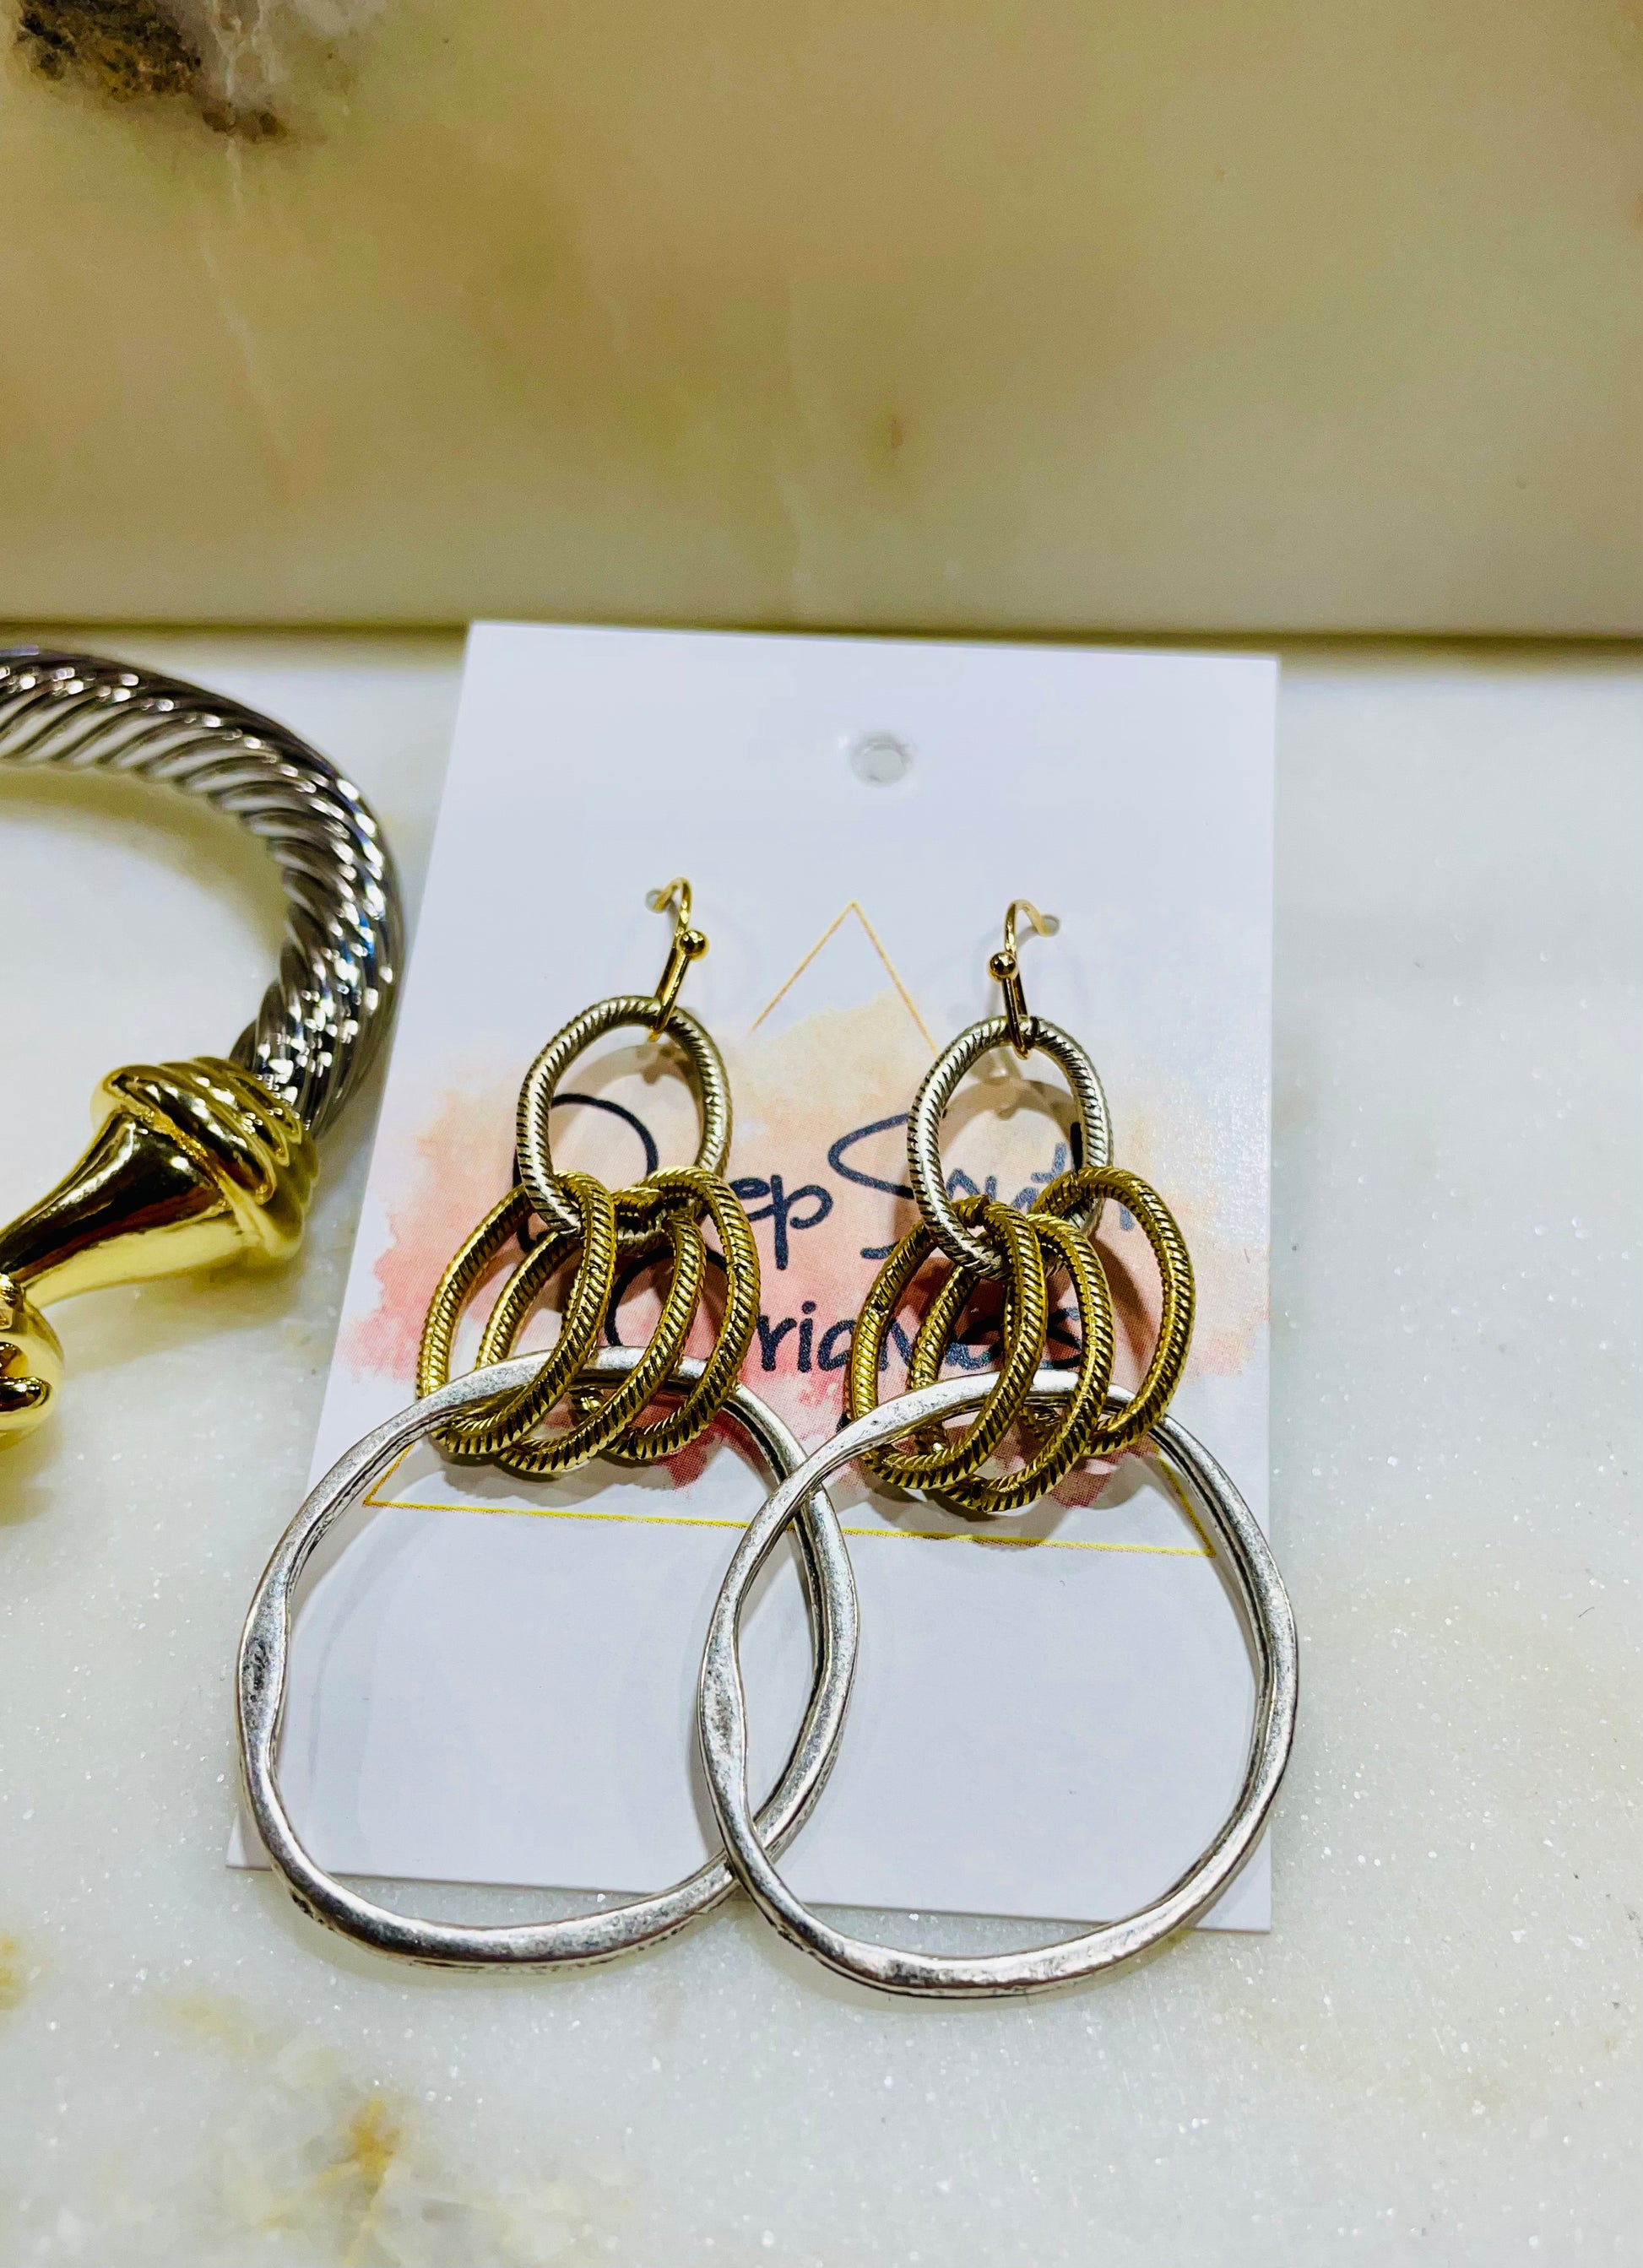 Handmade Gold and Silver Circle Earrings by Deep South Originals - Deep South Originals